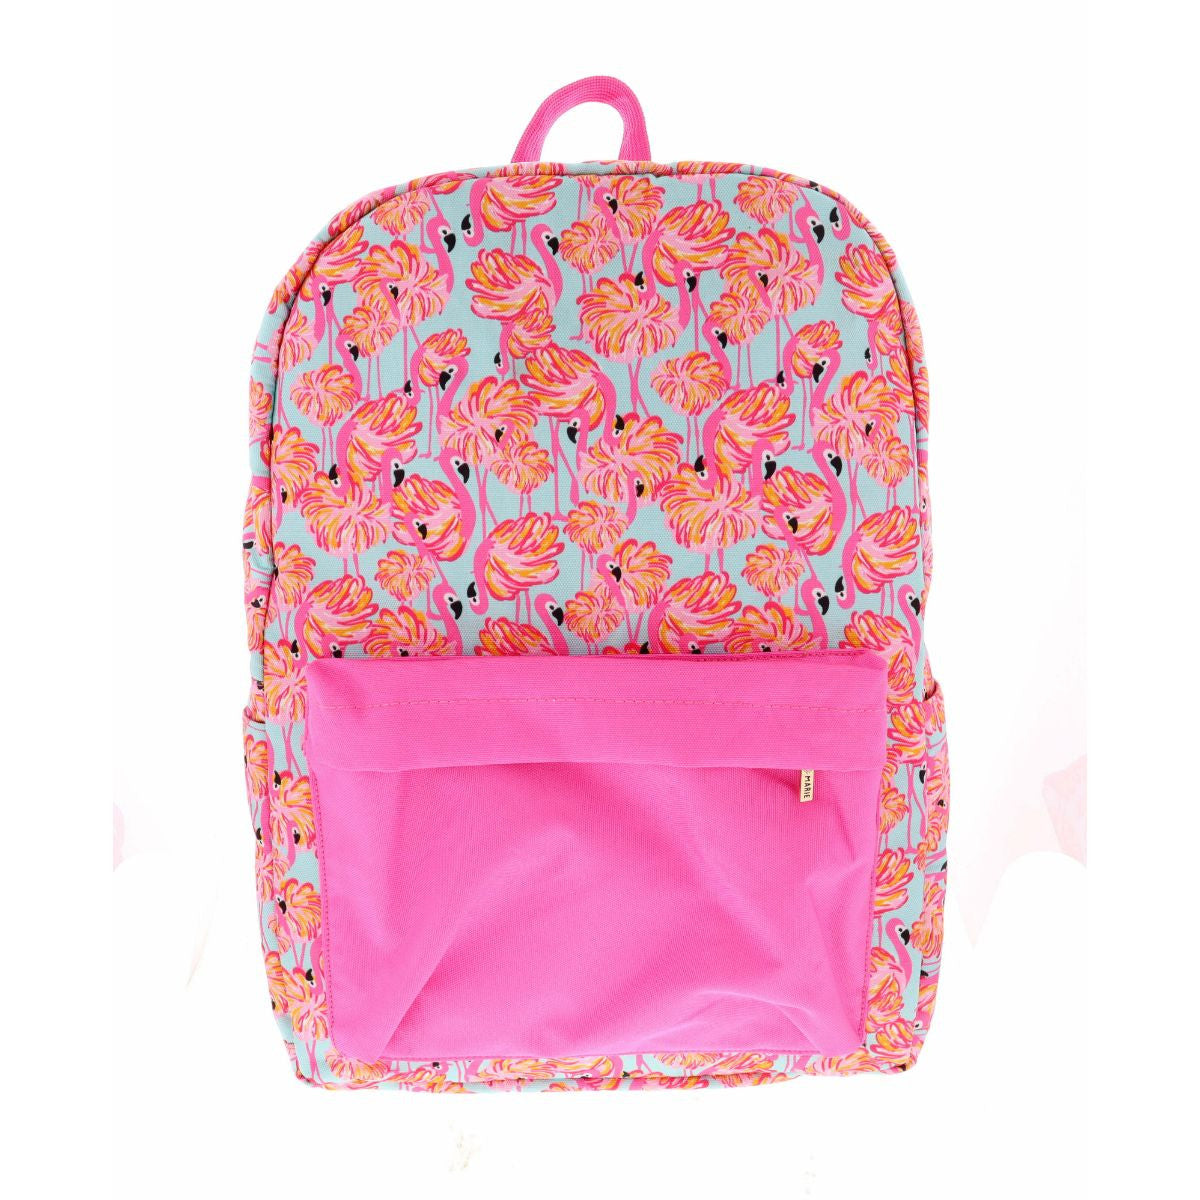 shake your feathers backpack